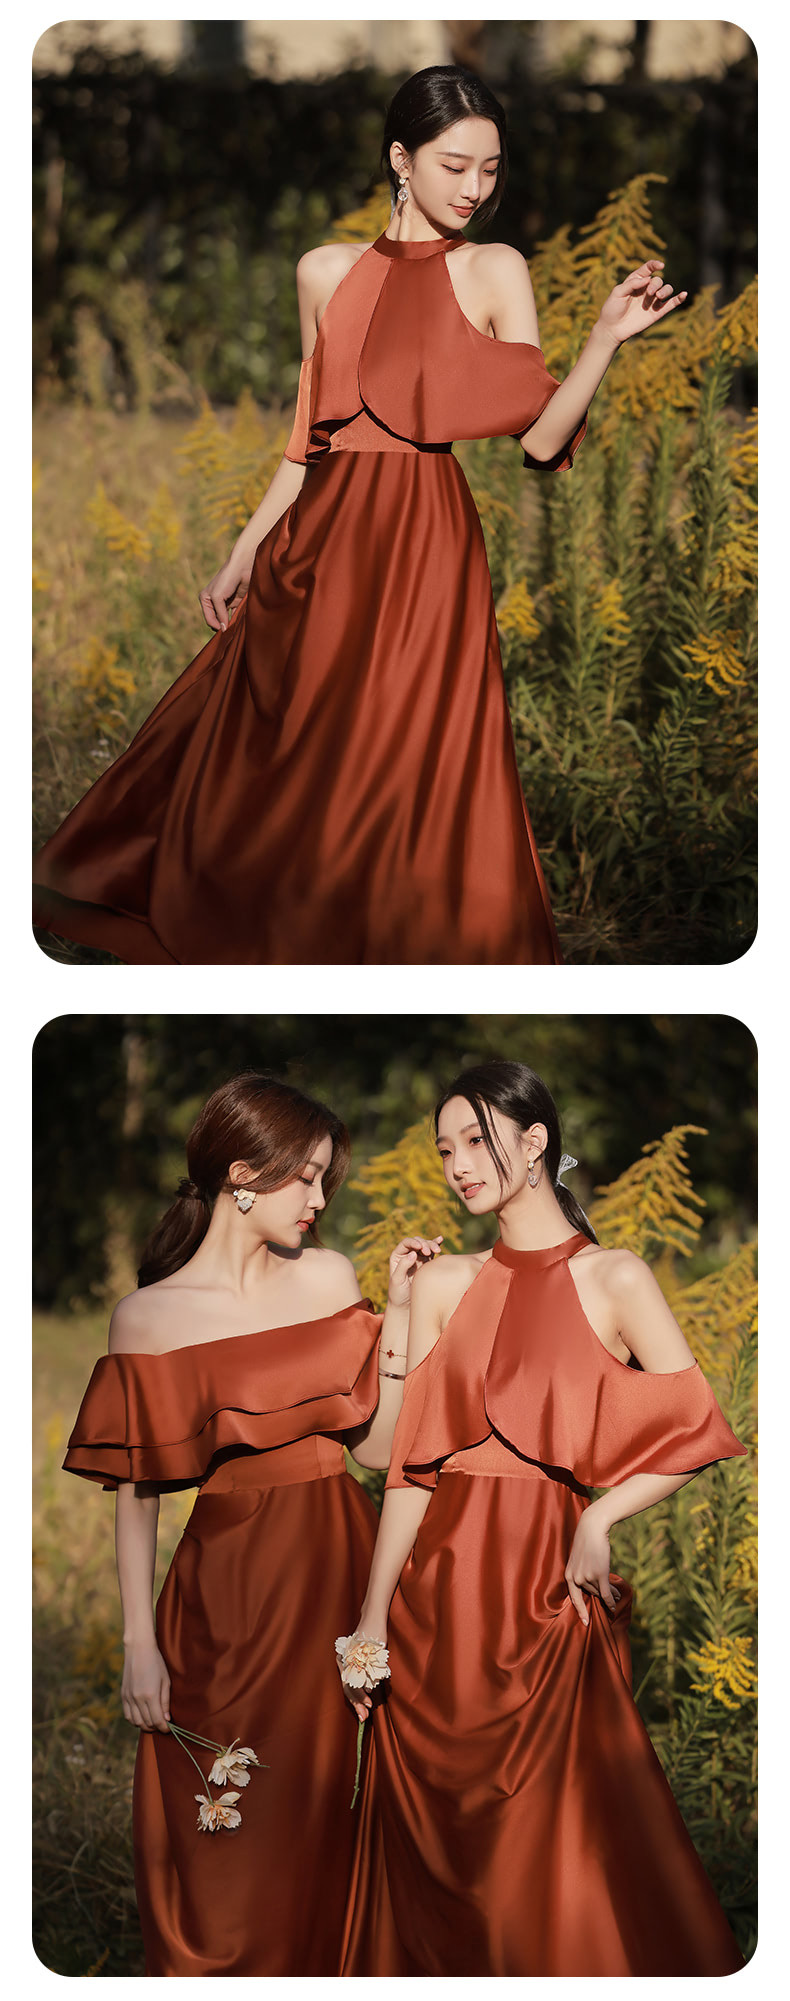 Sweet-Brick-Red-Bridesmaid-Dress-Summer-Wedding-Guest-Outfits24